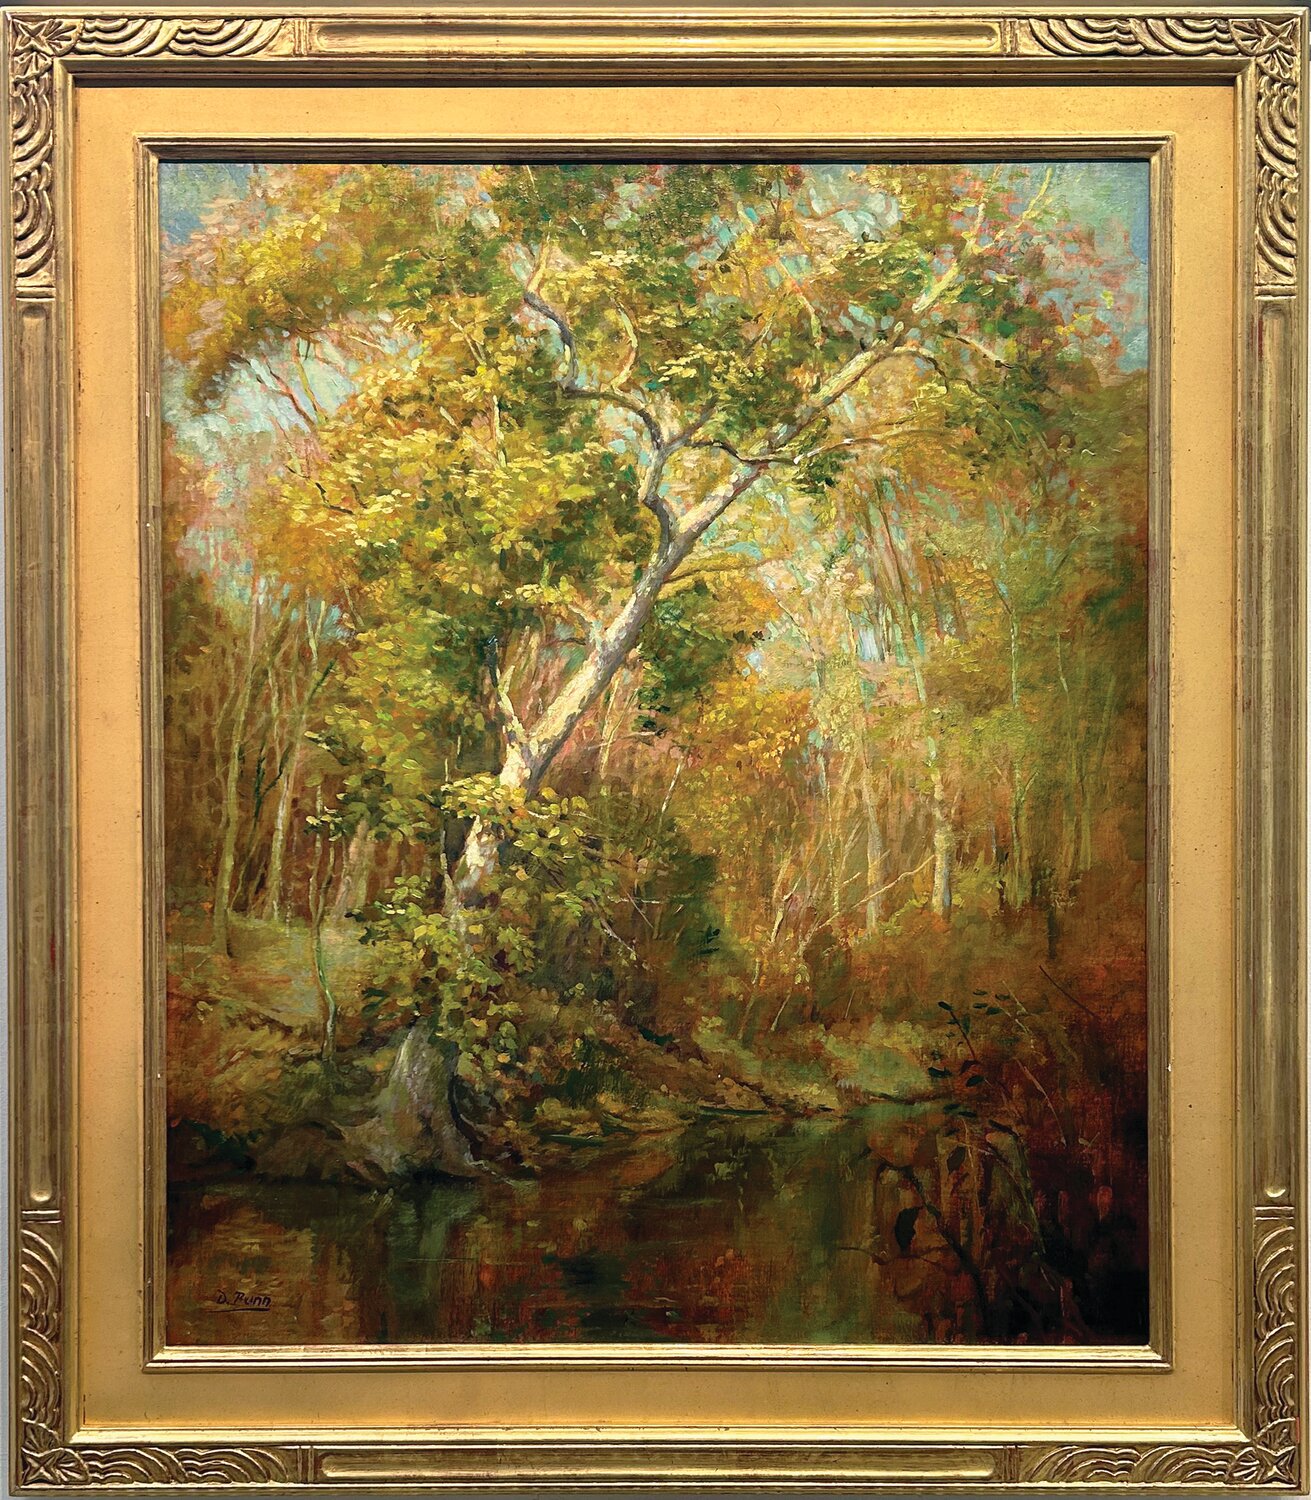 “The Glory of Autumn” is an oil painting by Dot Bunn.